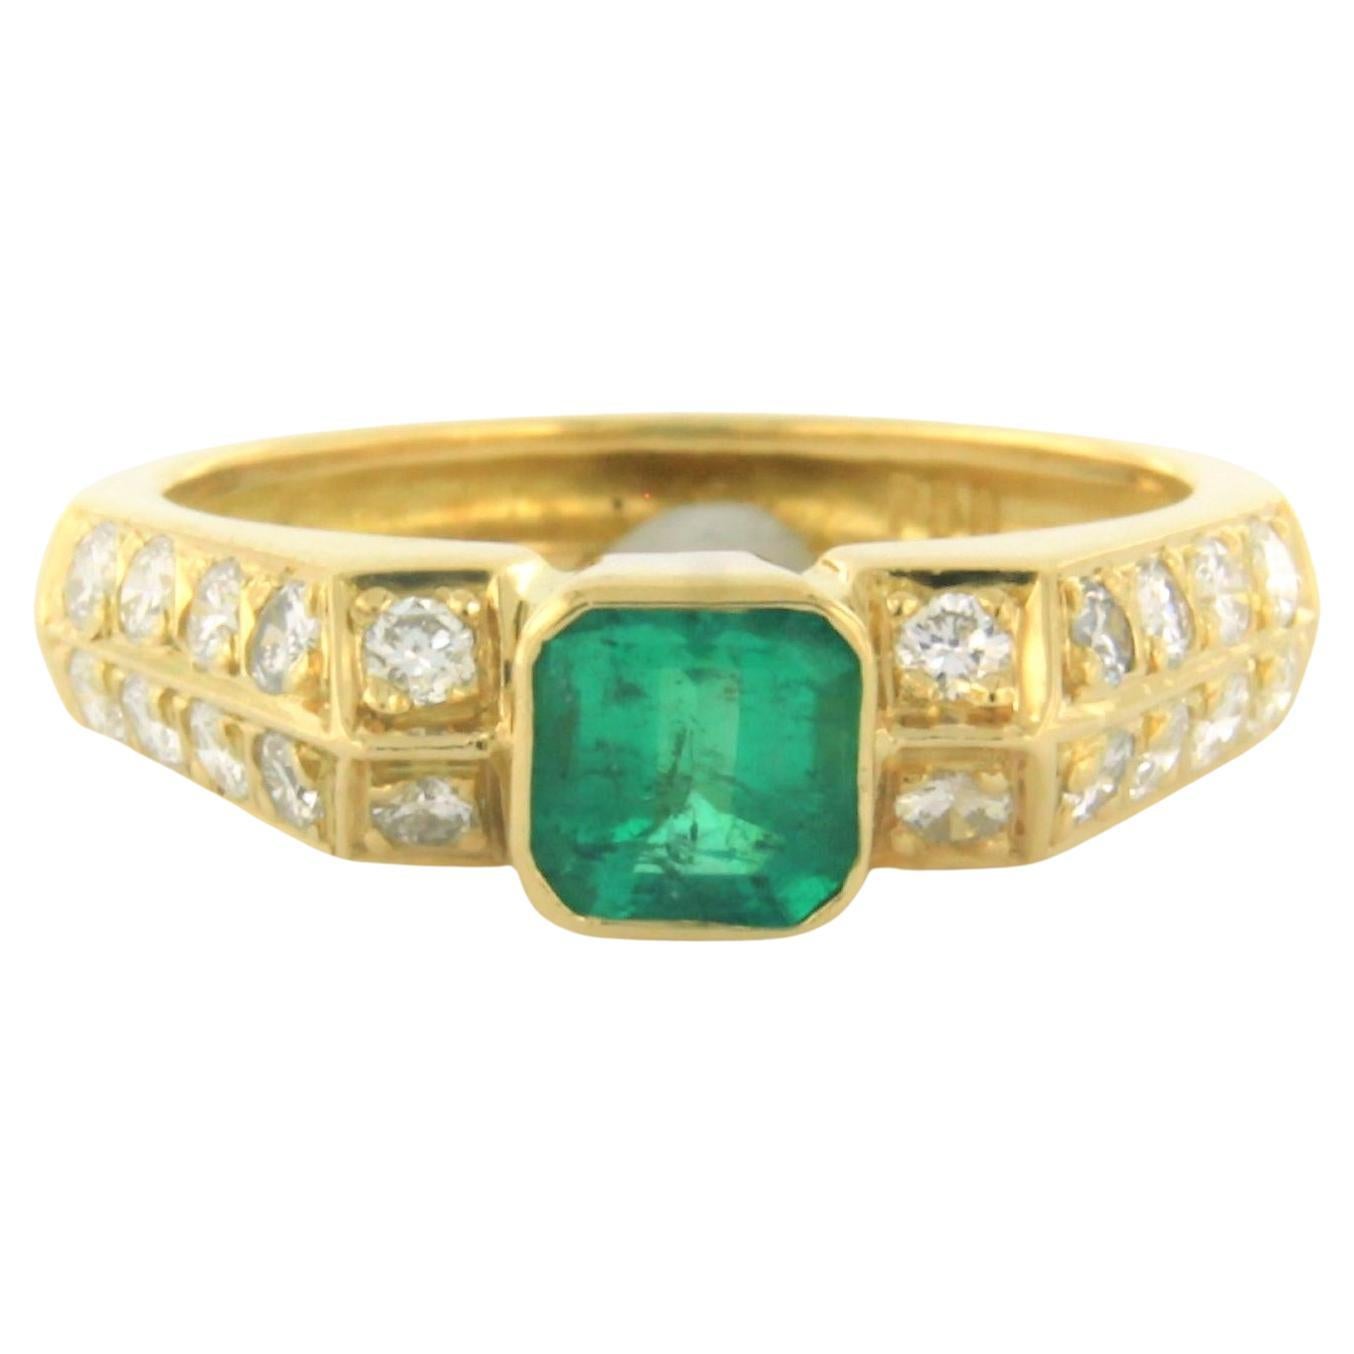 Ring Emerald and Diamond uo to 0.40ct 18k yellow gold